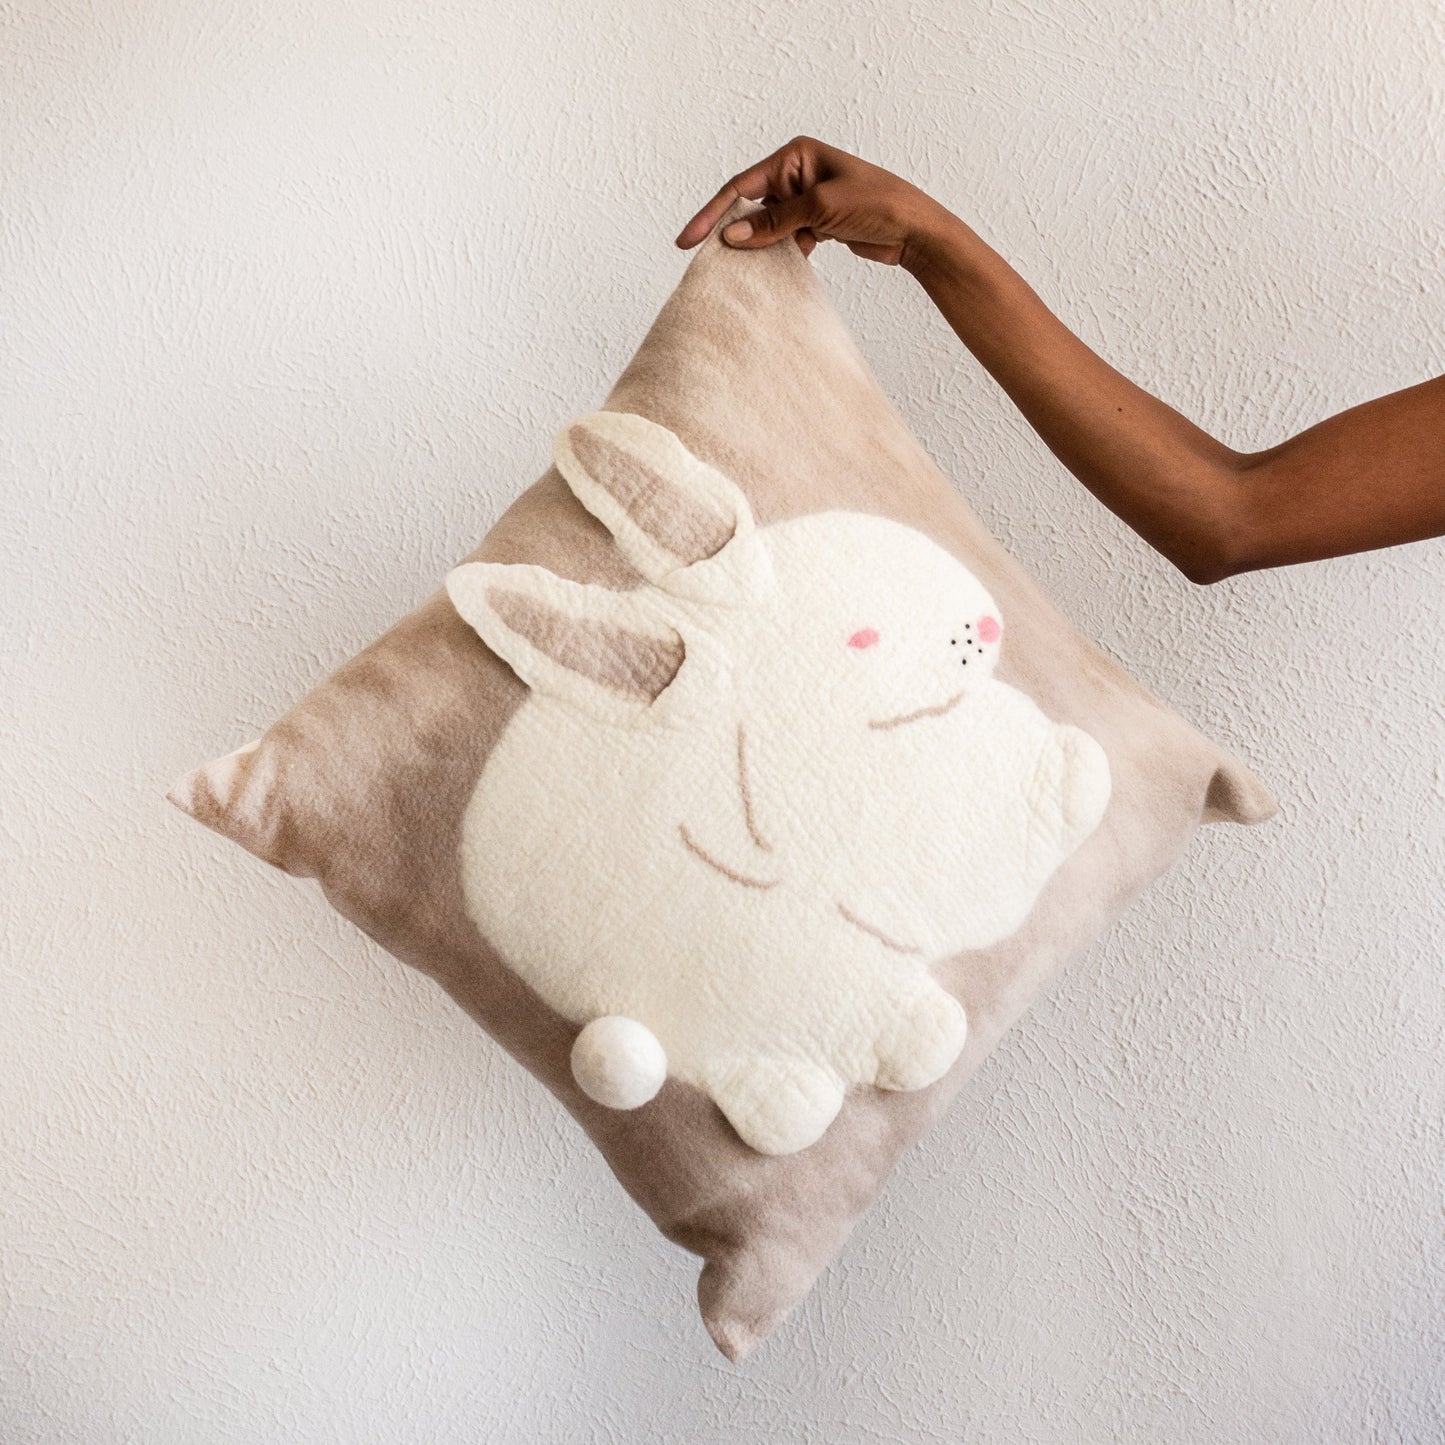 Bunny Throw Pillow Square 20"L x 20"H